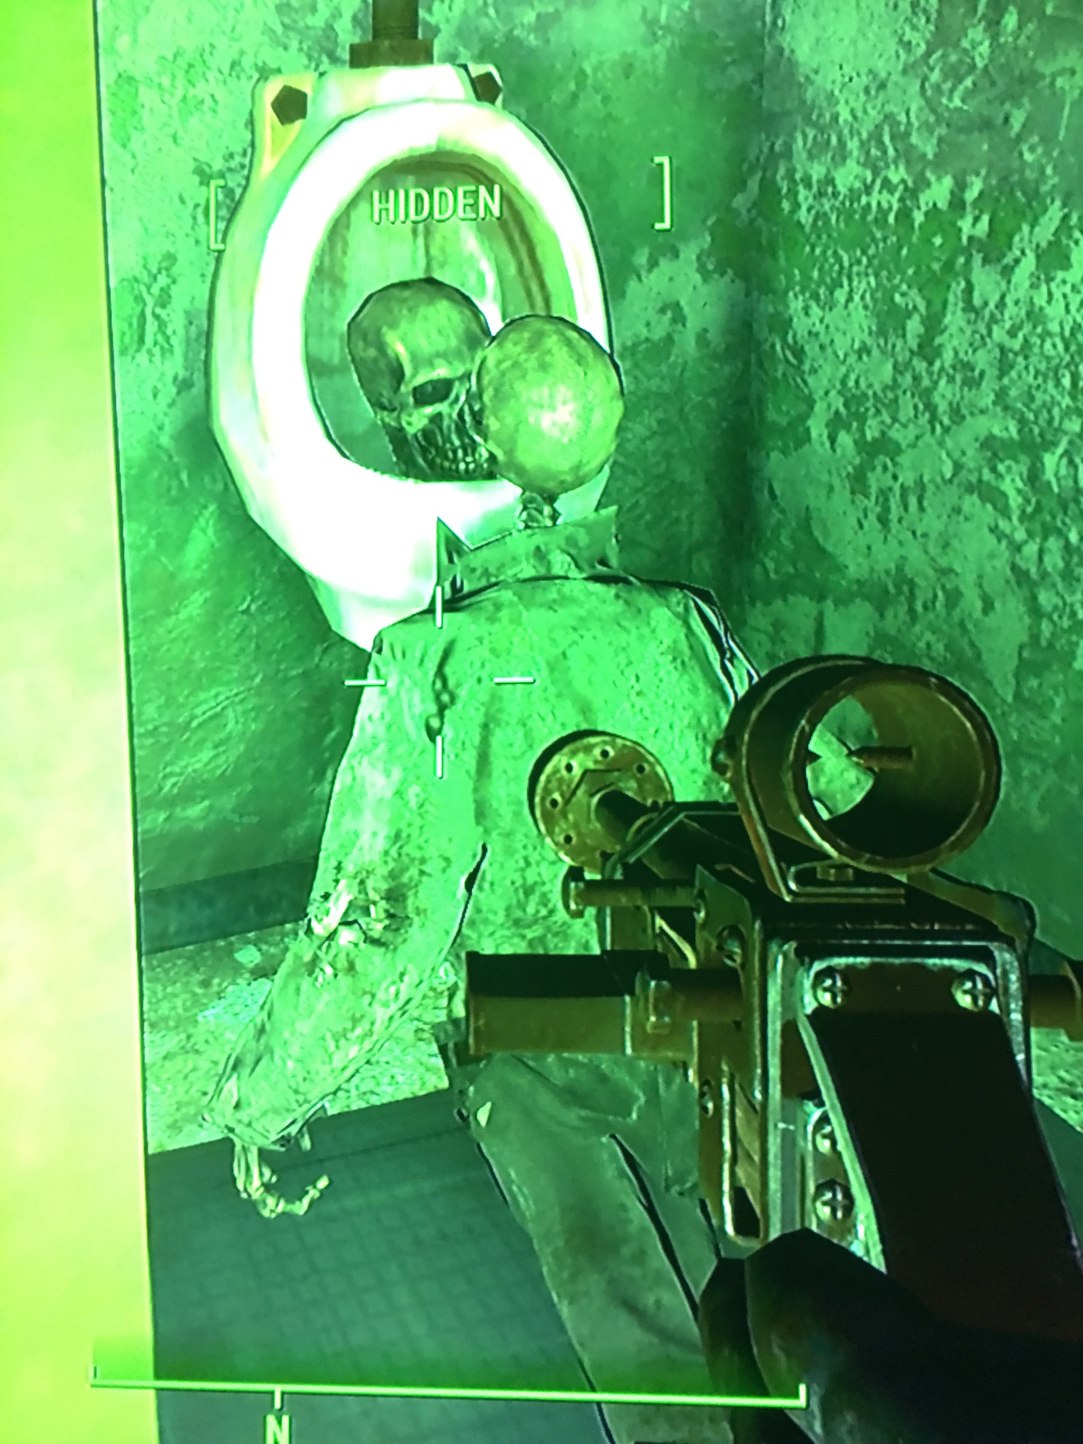 playing fallout 4... not sure how someone would explain what happened here.. - meme